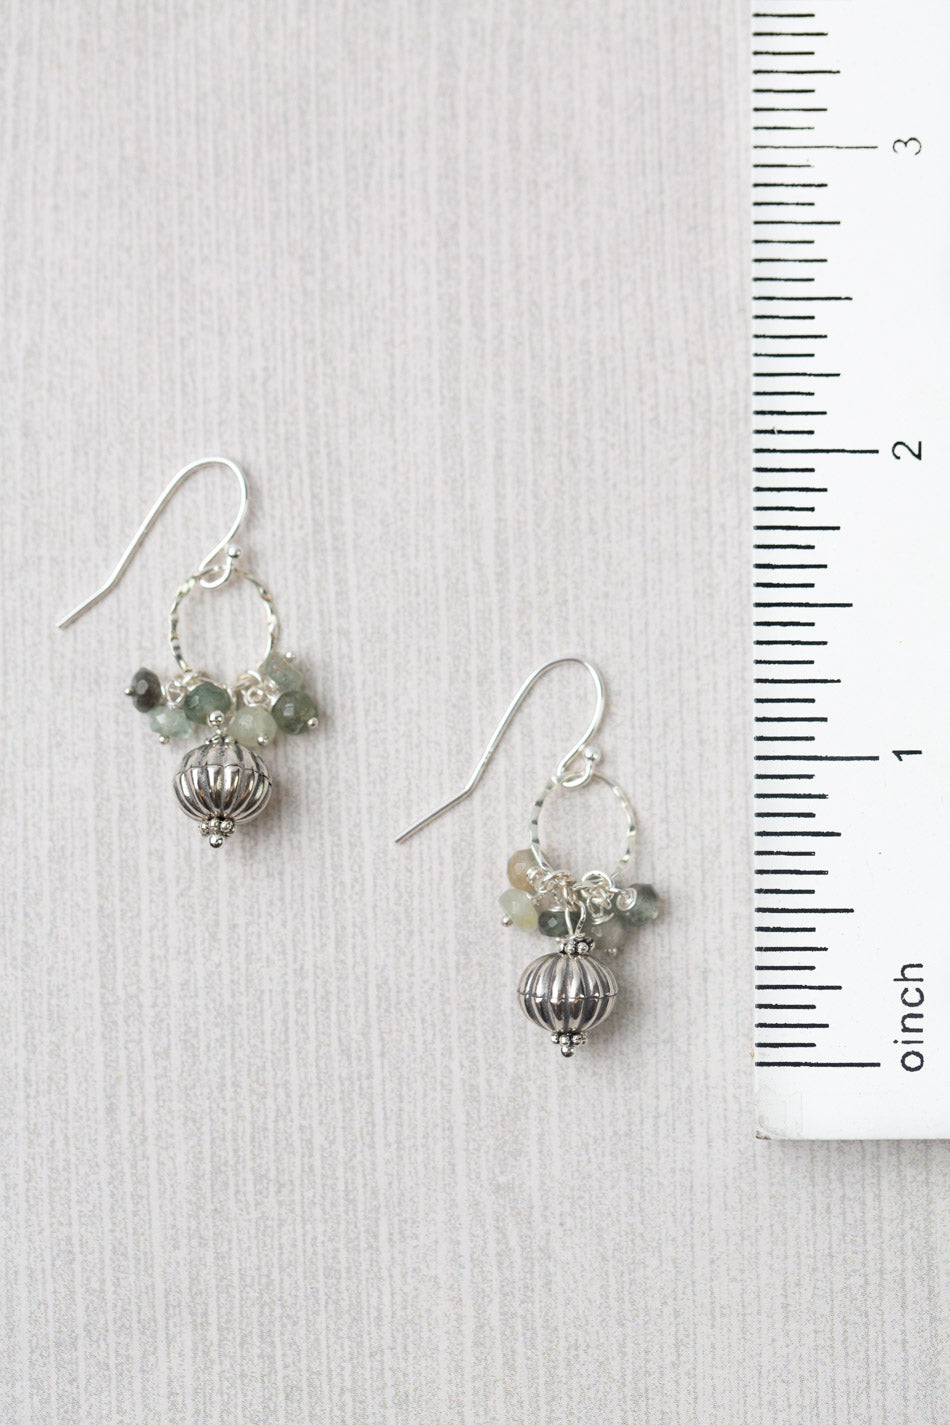 Resilience Green Moss Aquamarine, Prehnite With Corrugated Silver Bead Cluster Earrings